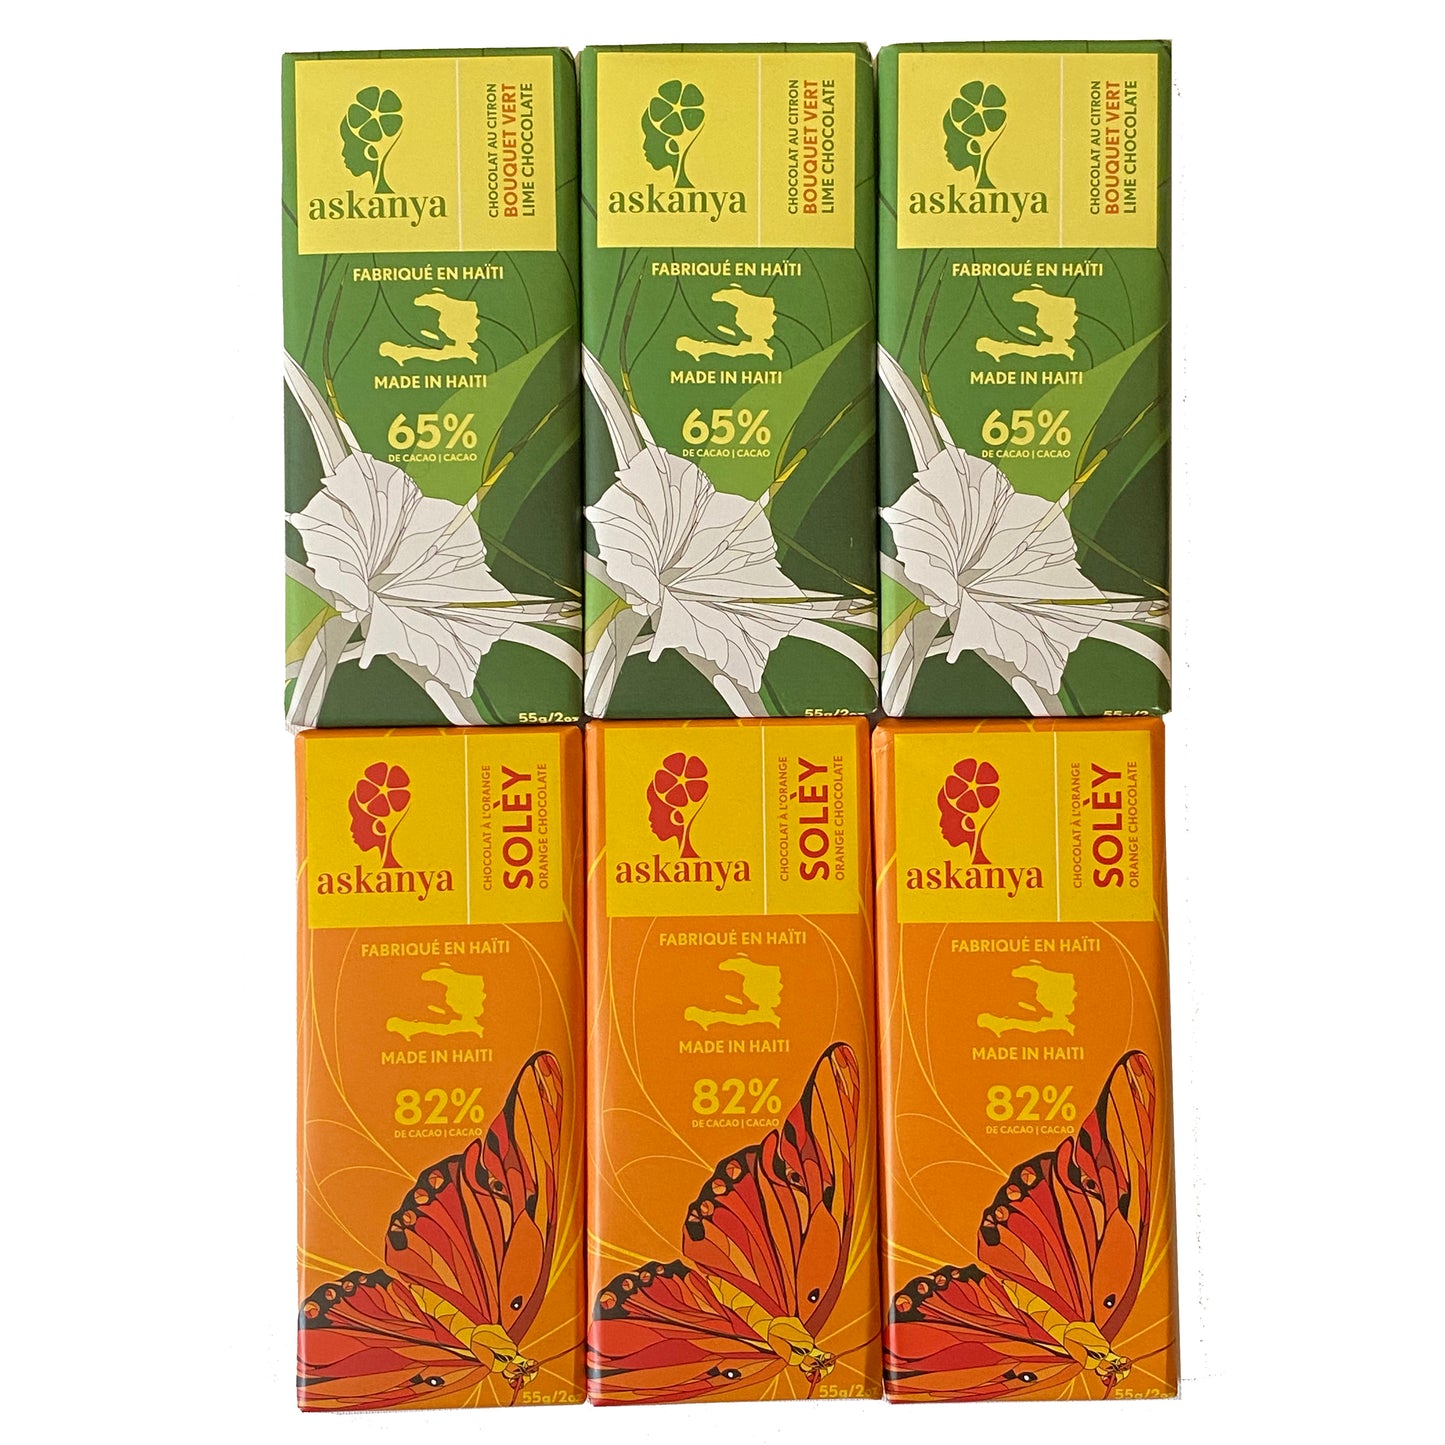 6 Chocolates Bars - 3 Bouquet Vert (Lime Chocolate - 65% Cacao) and 3 Soley (Orange Chocolate - 82% Cacao). Each bar weighs 2 oz